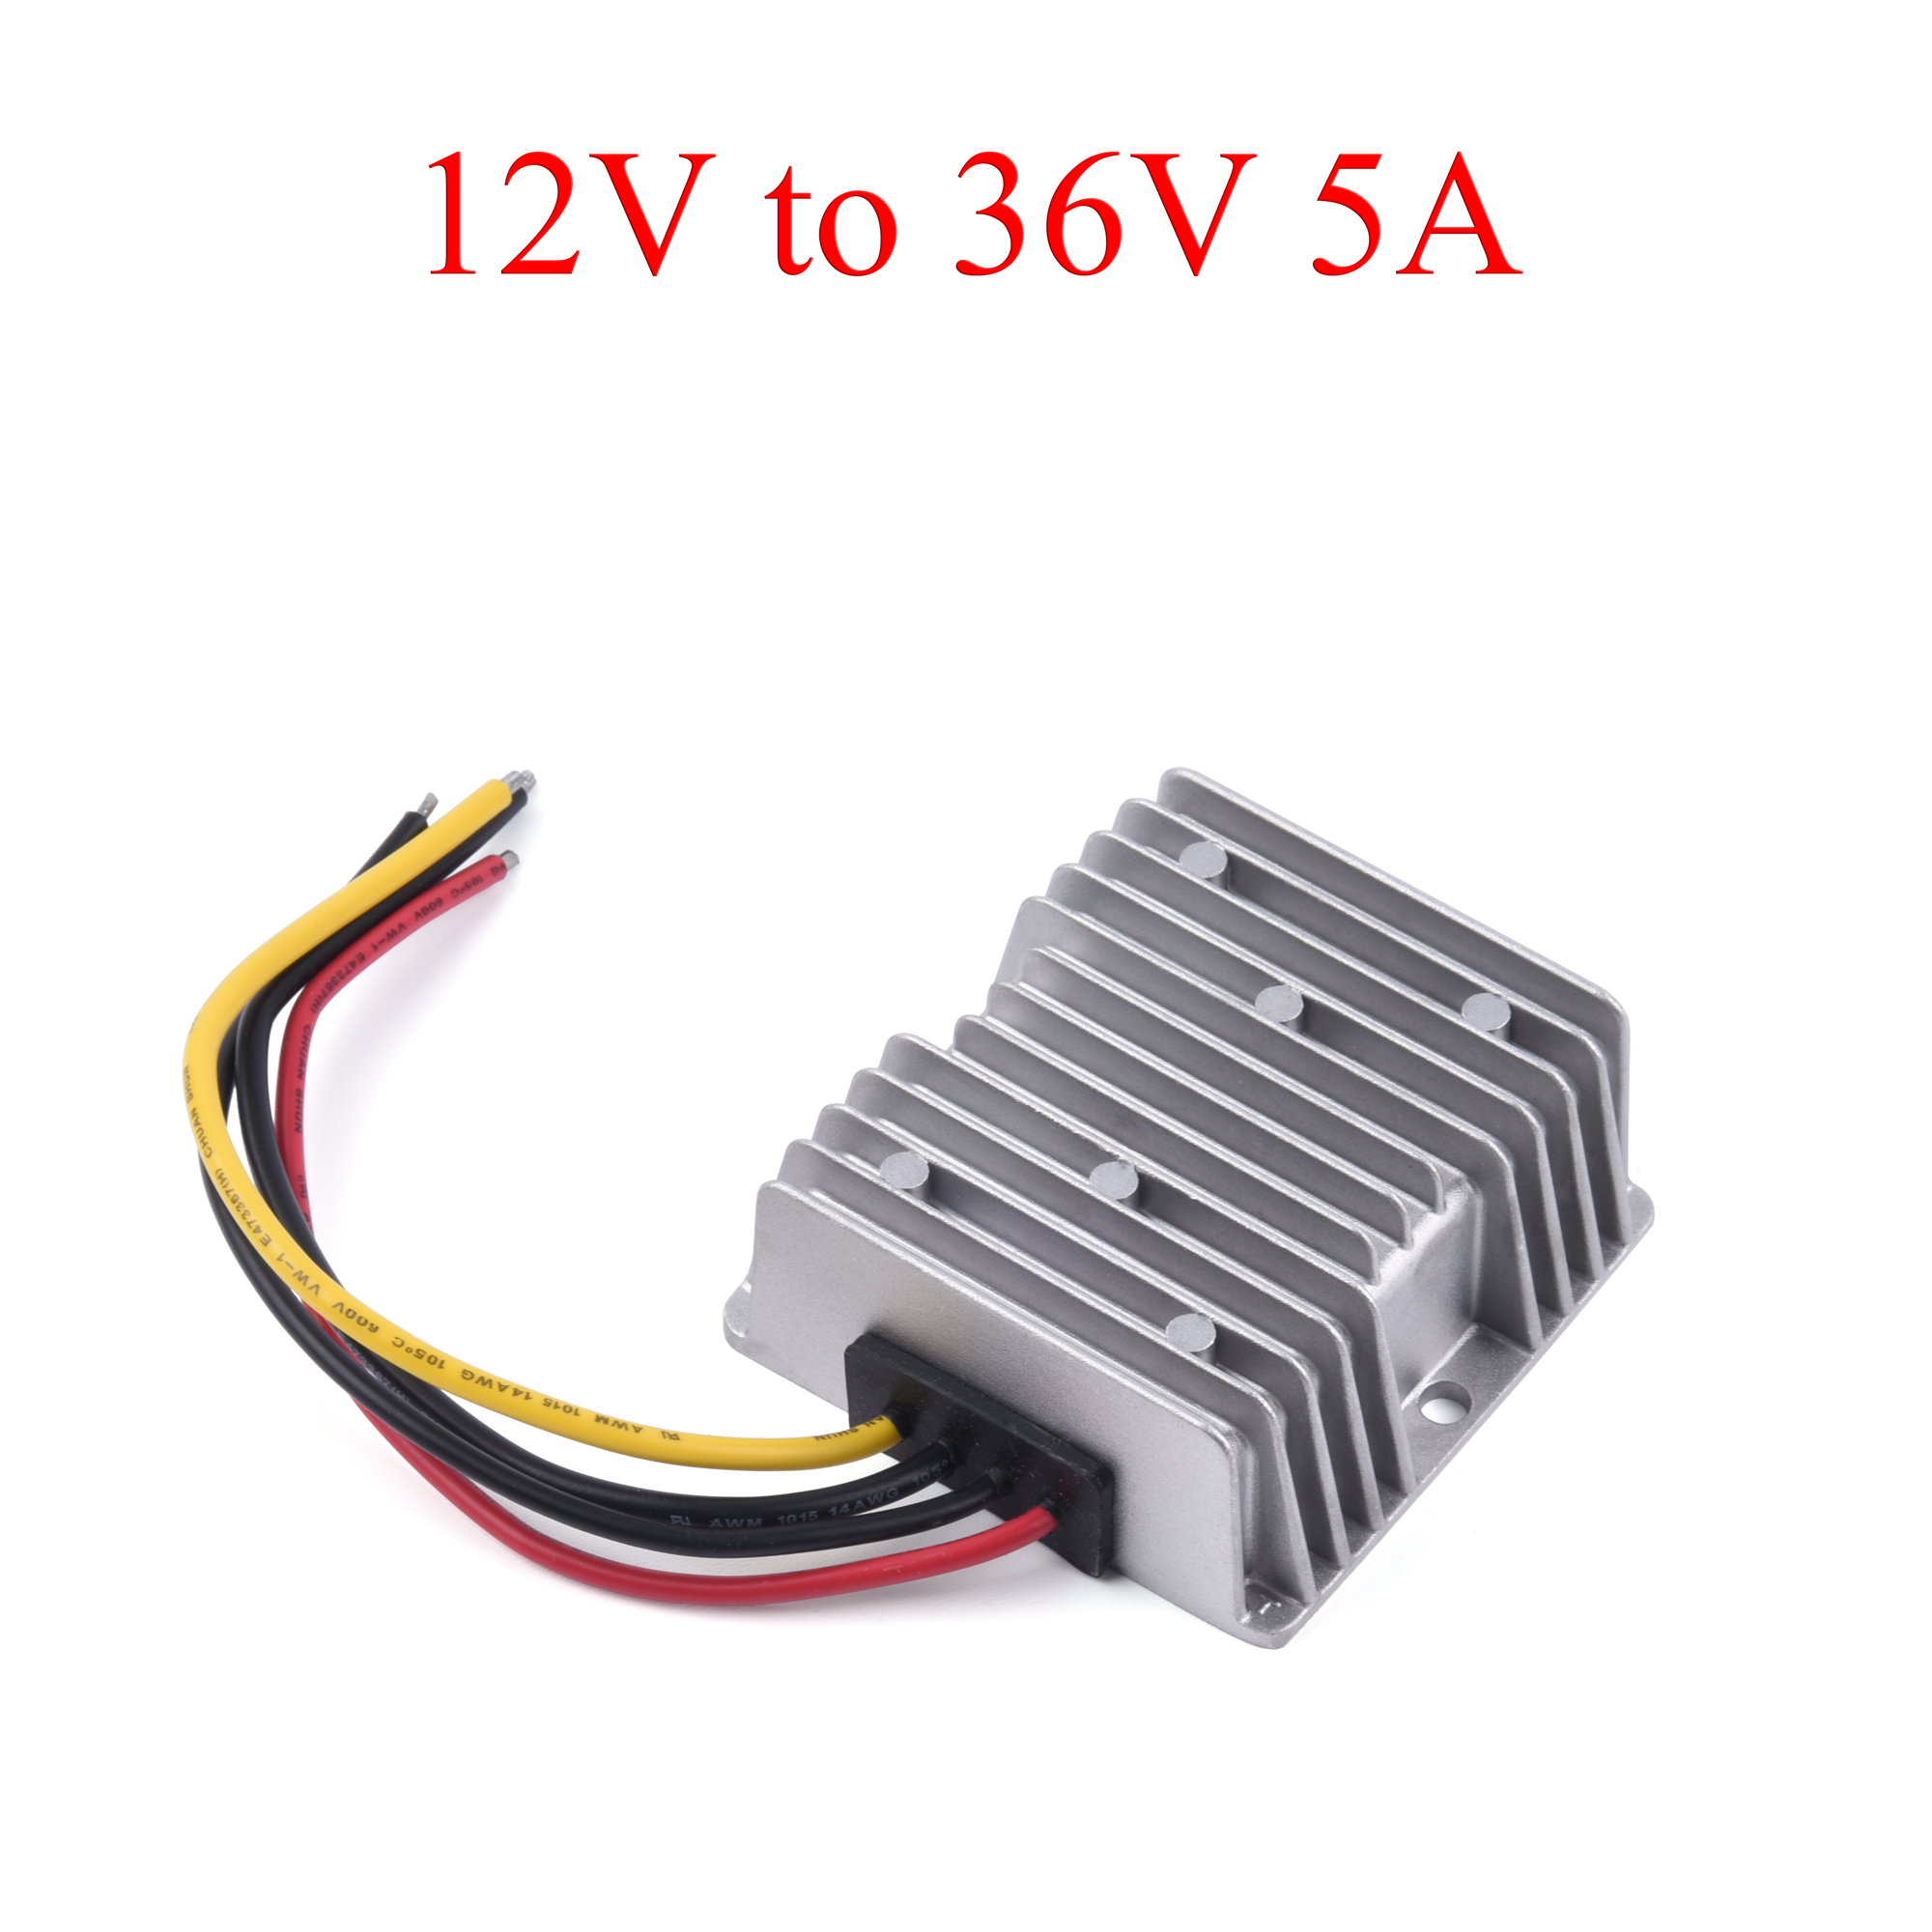 DC 12V/24V to 19V/24V/36V/48V Power Converter 3A 5A 8A 10A 12A 15A 20A Auto Boost  Regulator Step-Up Voltage Supply Module For Car